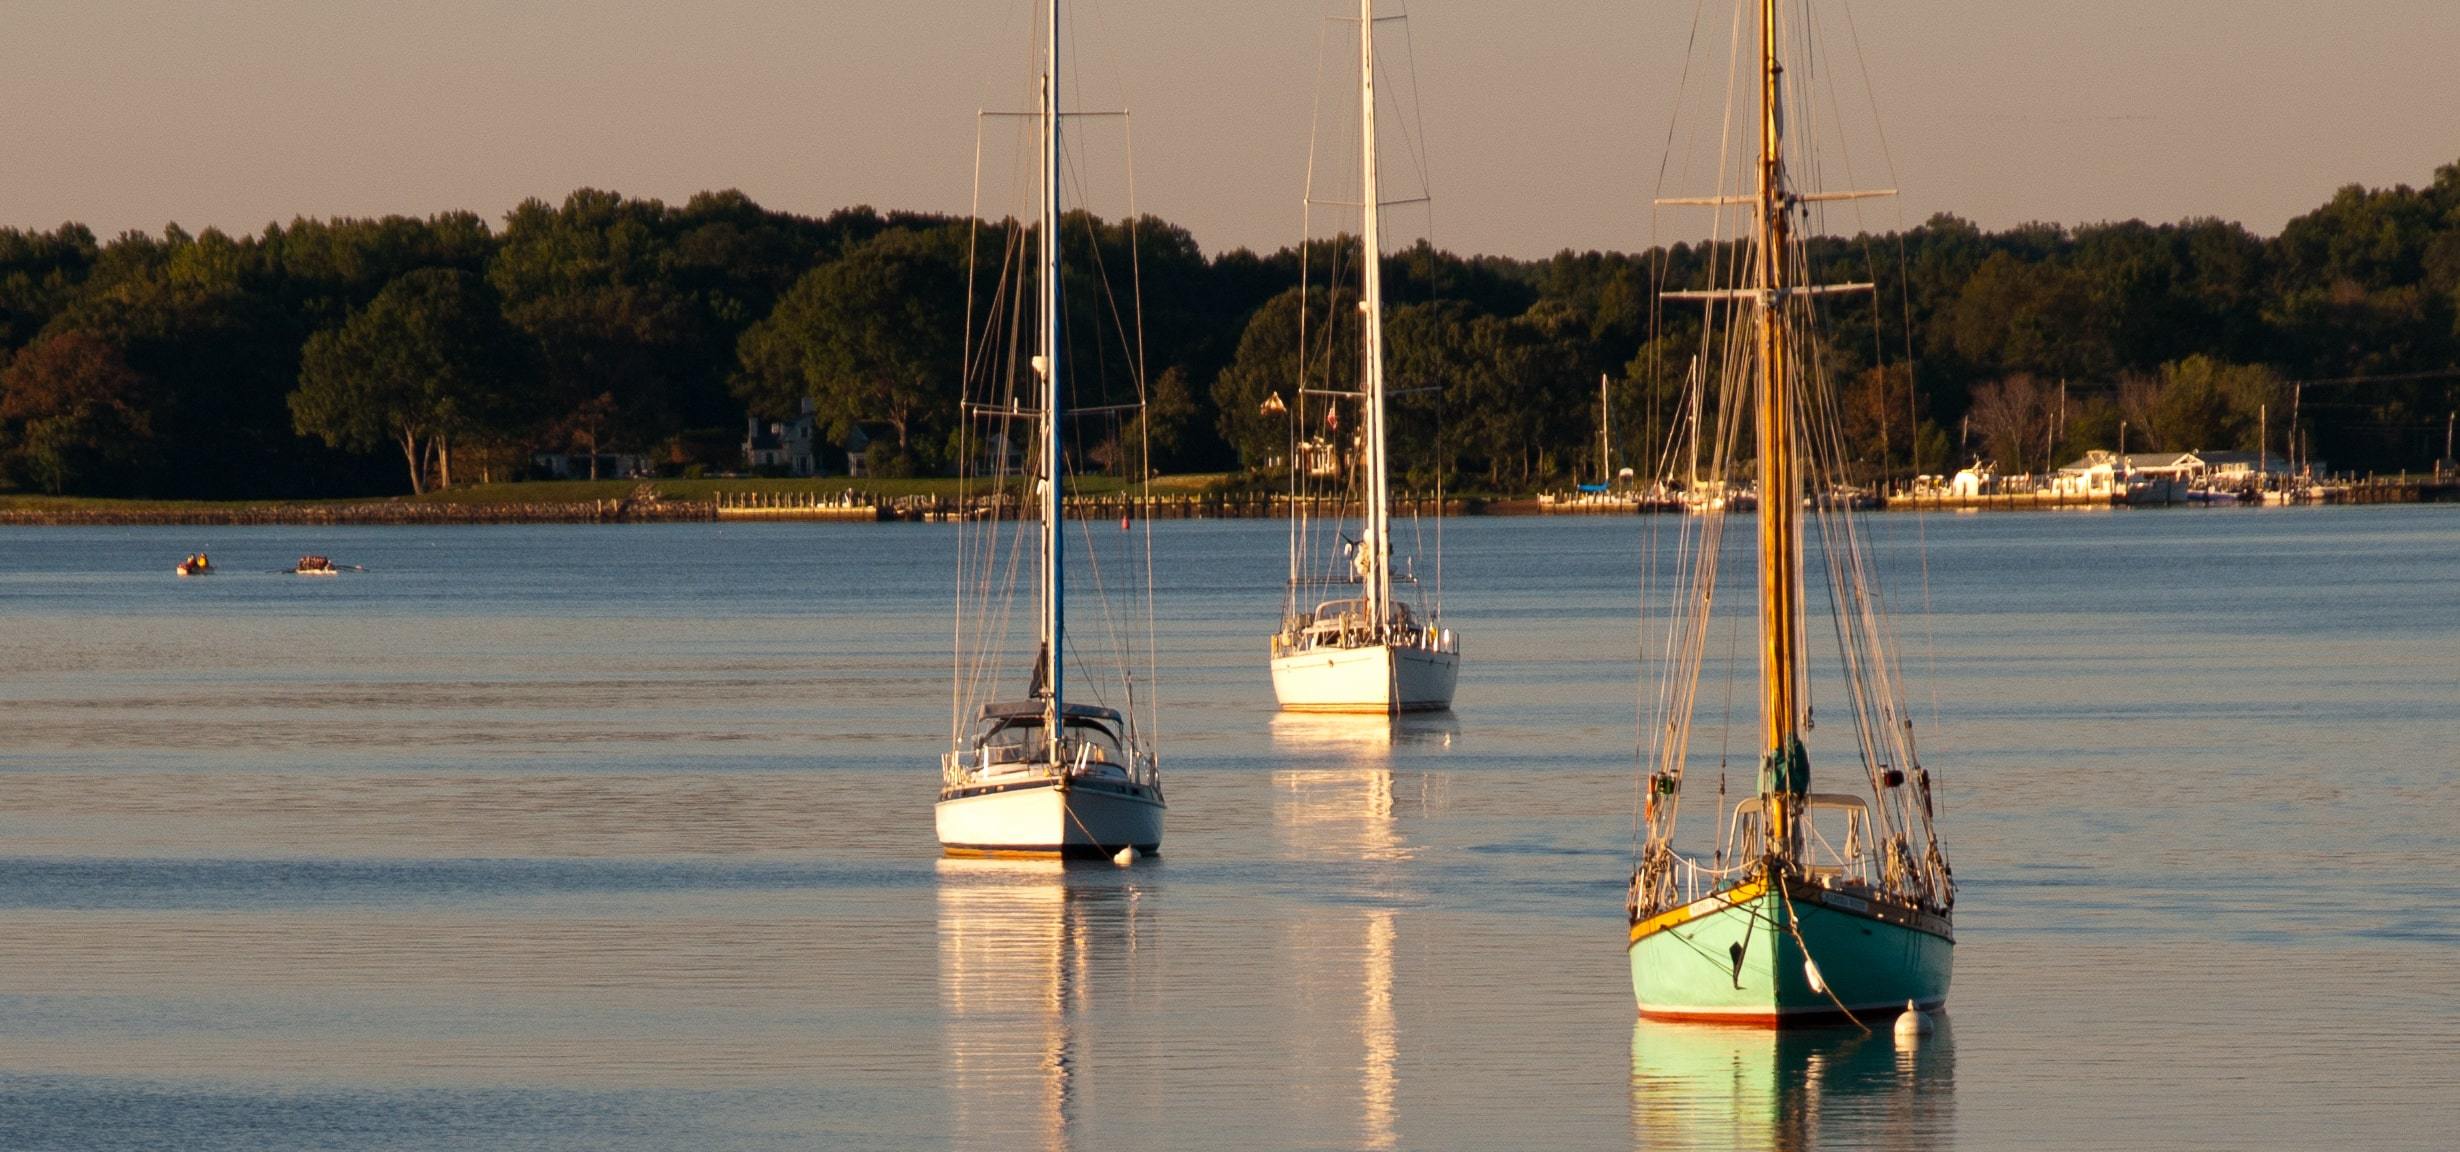 Boats at sunset on Chester River near Queenstown, MD